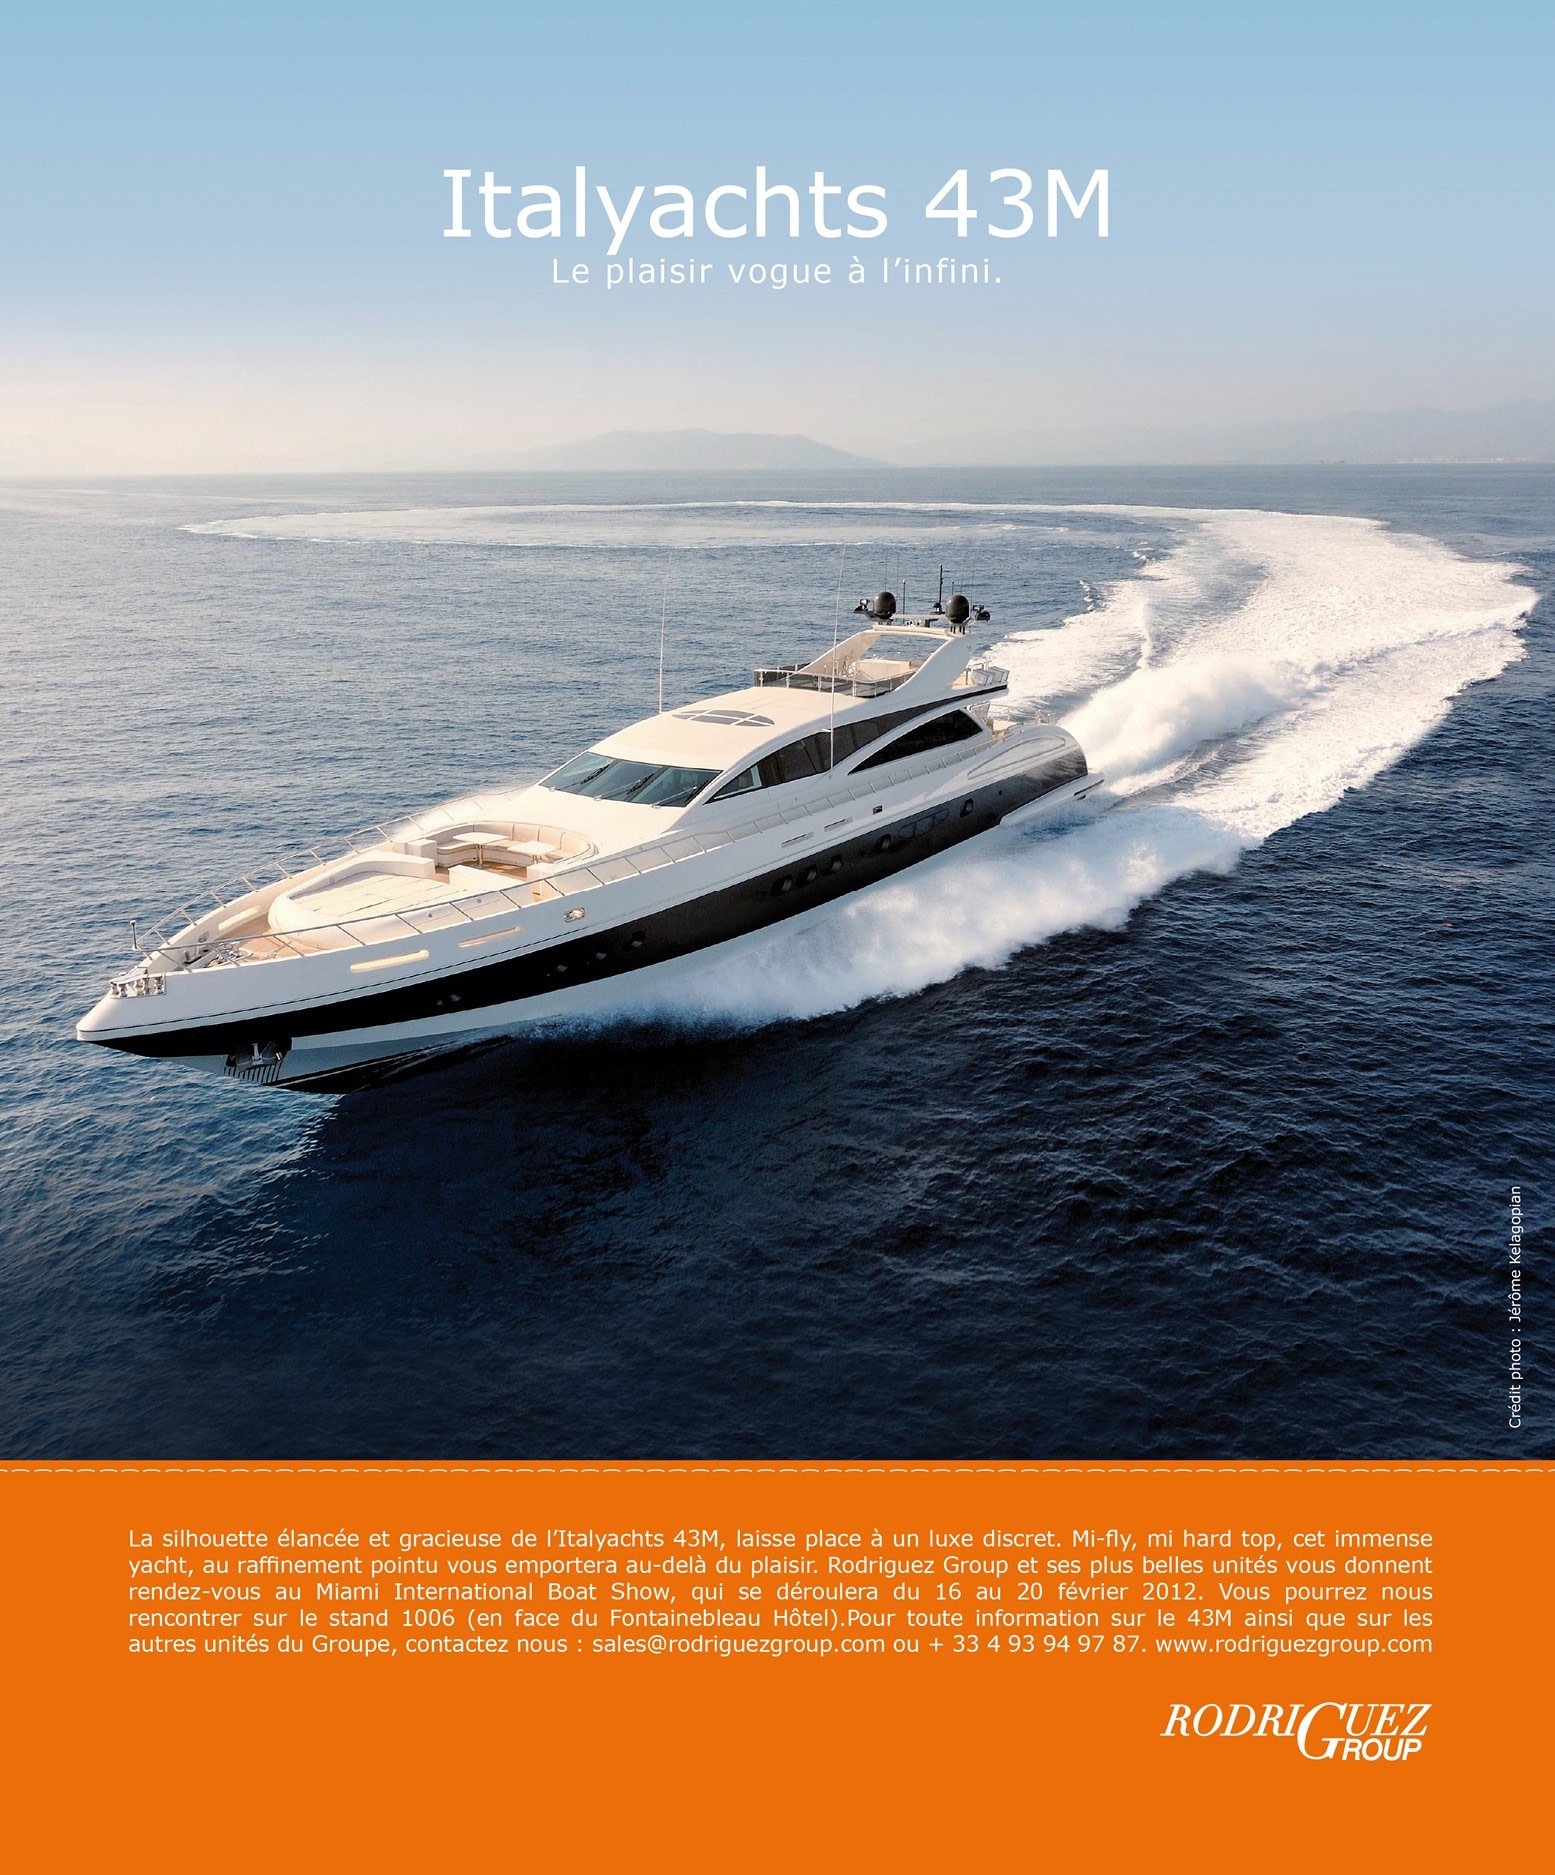 plate-ou-gazeuse-creations-rodriguez-group-annonce-presse-italyachts-43m@2x